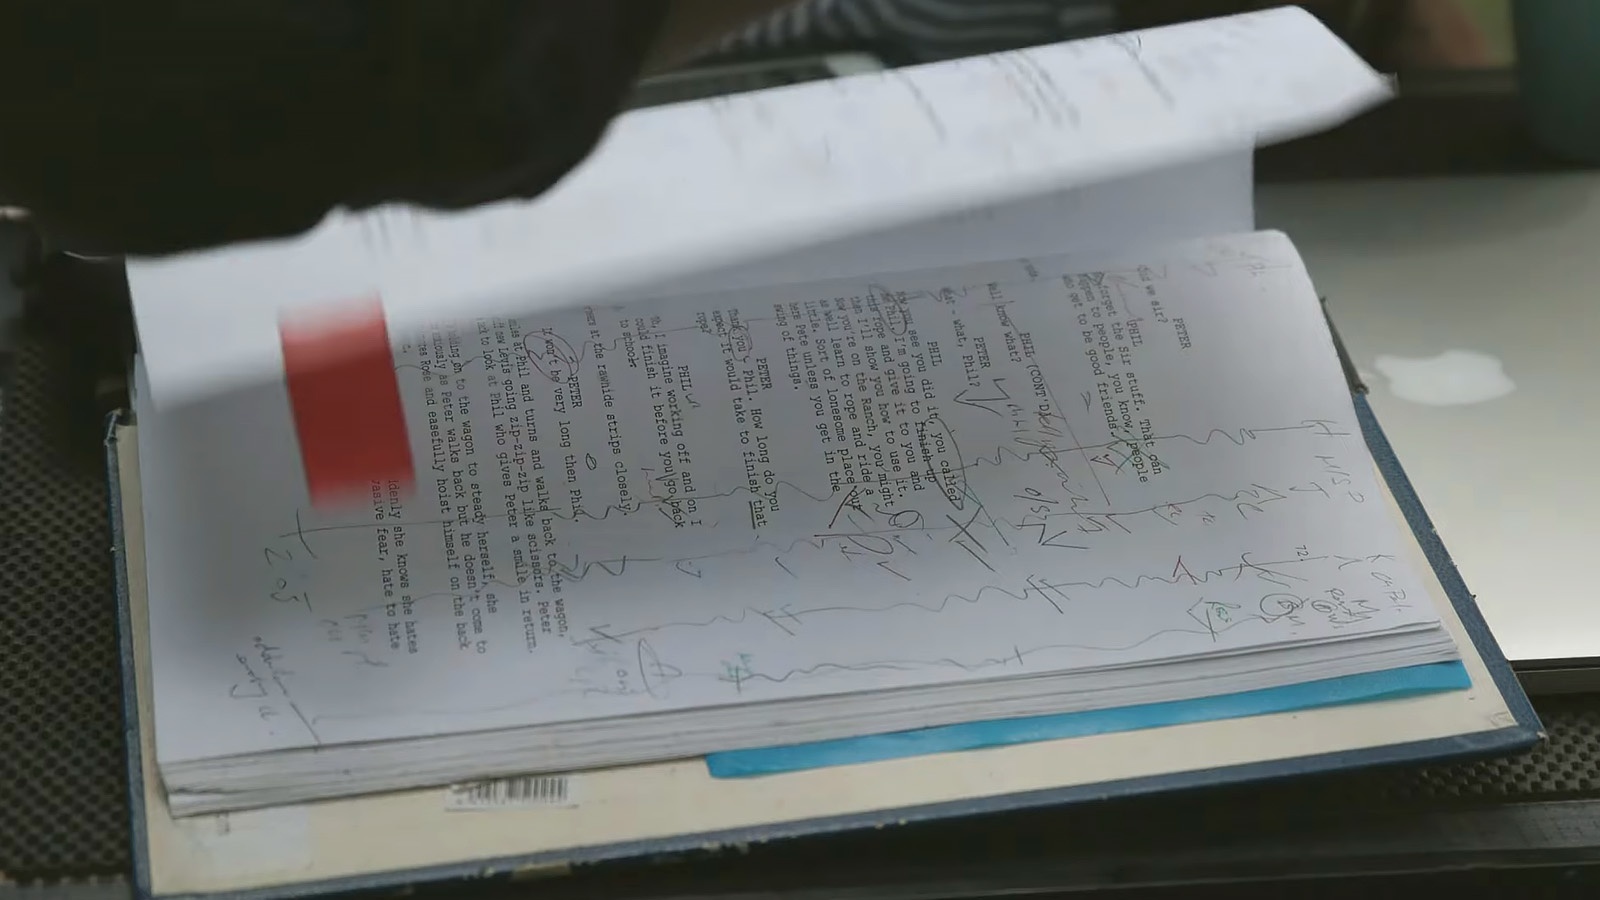 Jane Campion’s script notes on location for The Power of the Dog. Image © Netflix